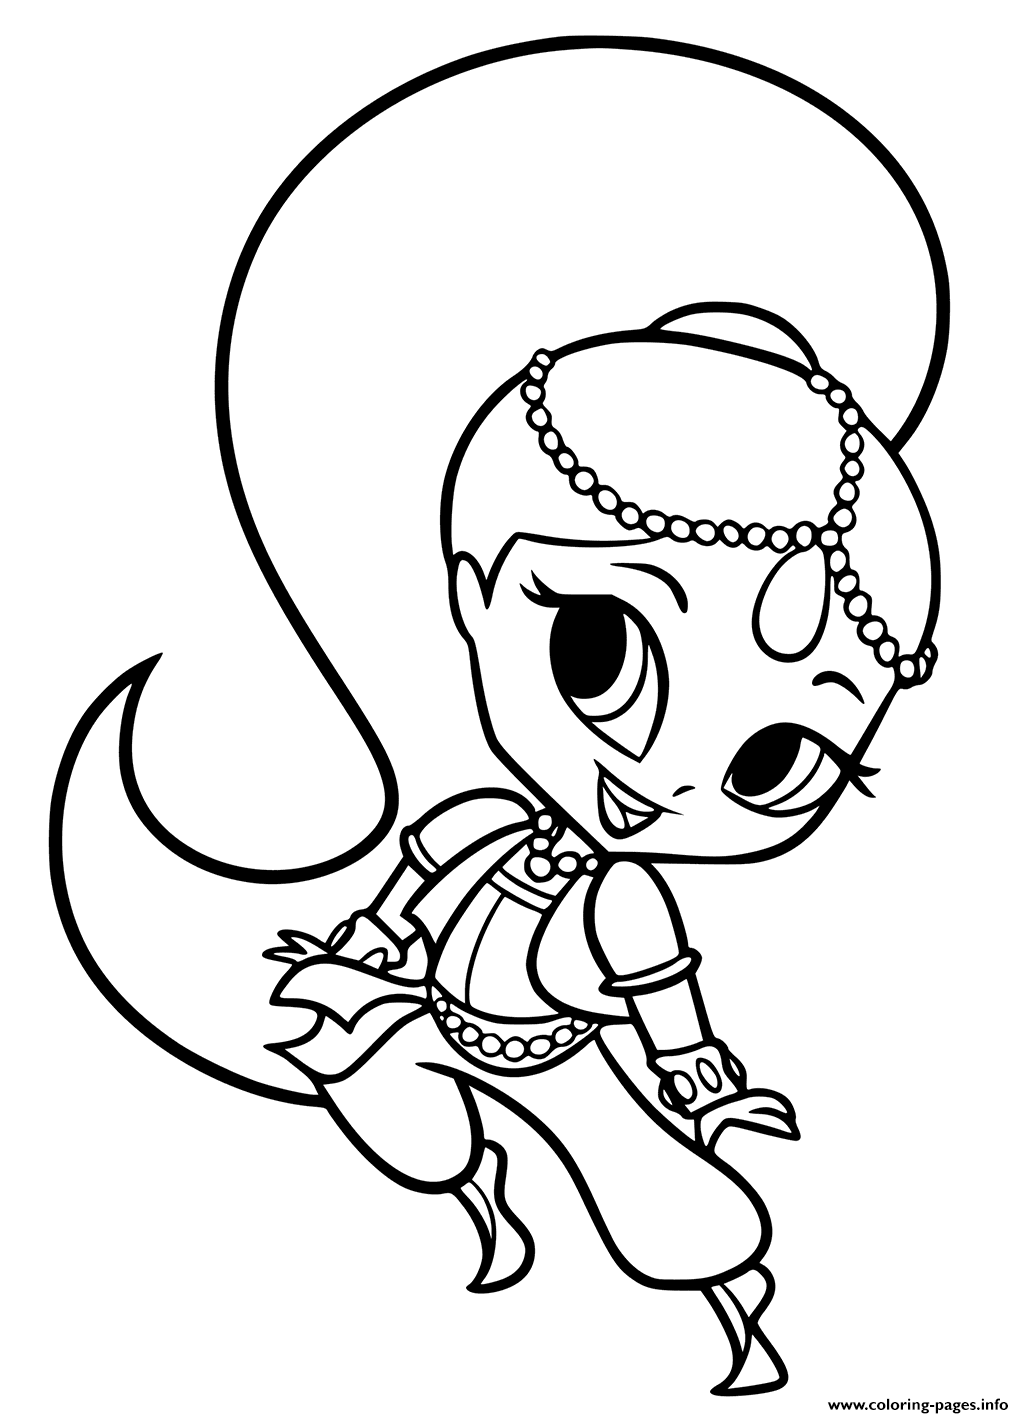 Shimmer And Shine To Colour Shimmer coloring pages